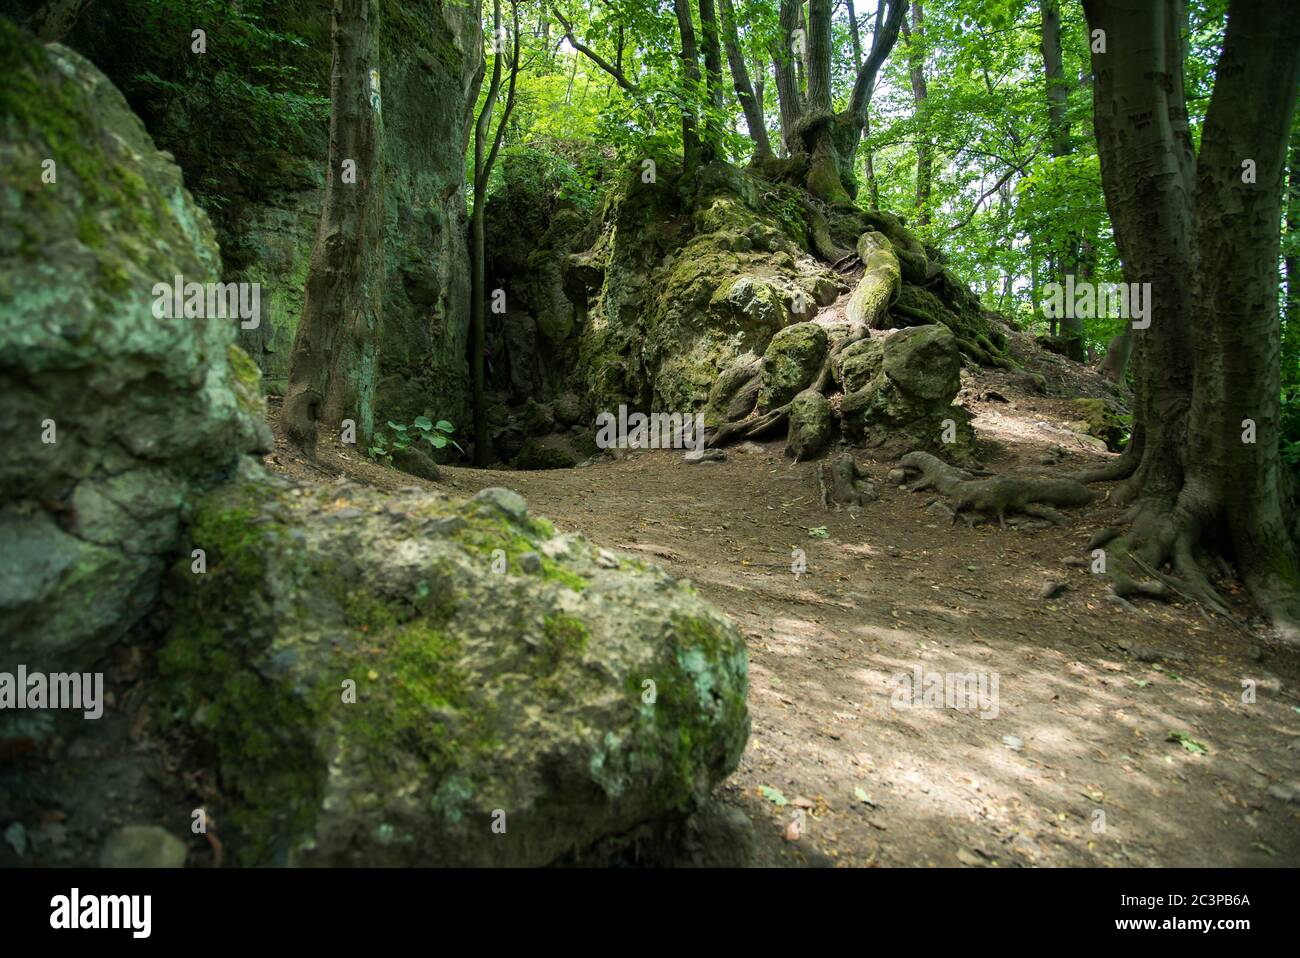 Vasas-szakadek, famous Hungarian cave, chasm and excursion site in the Visegrad mountains, in Hungary. Stock Photo